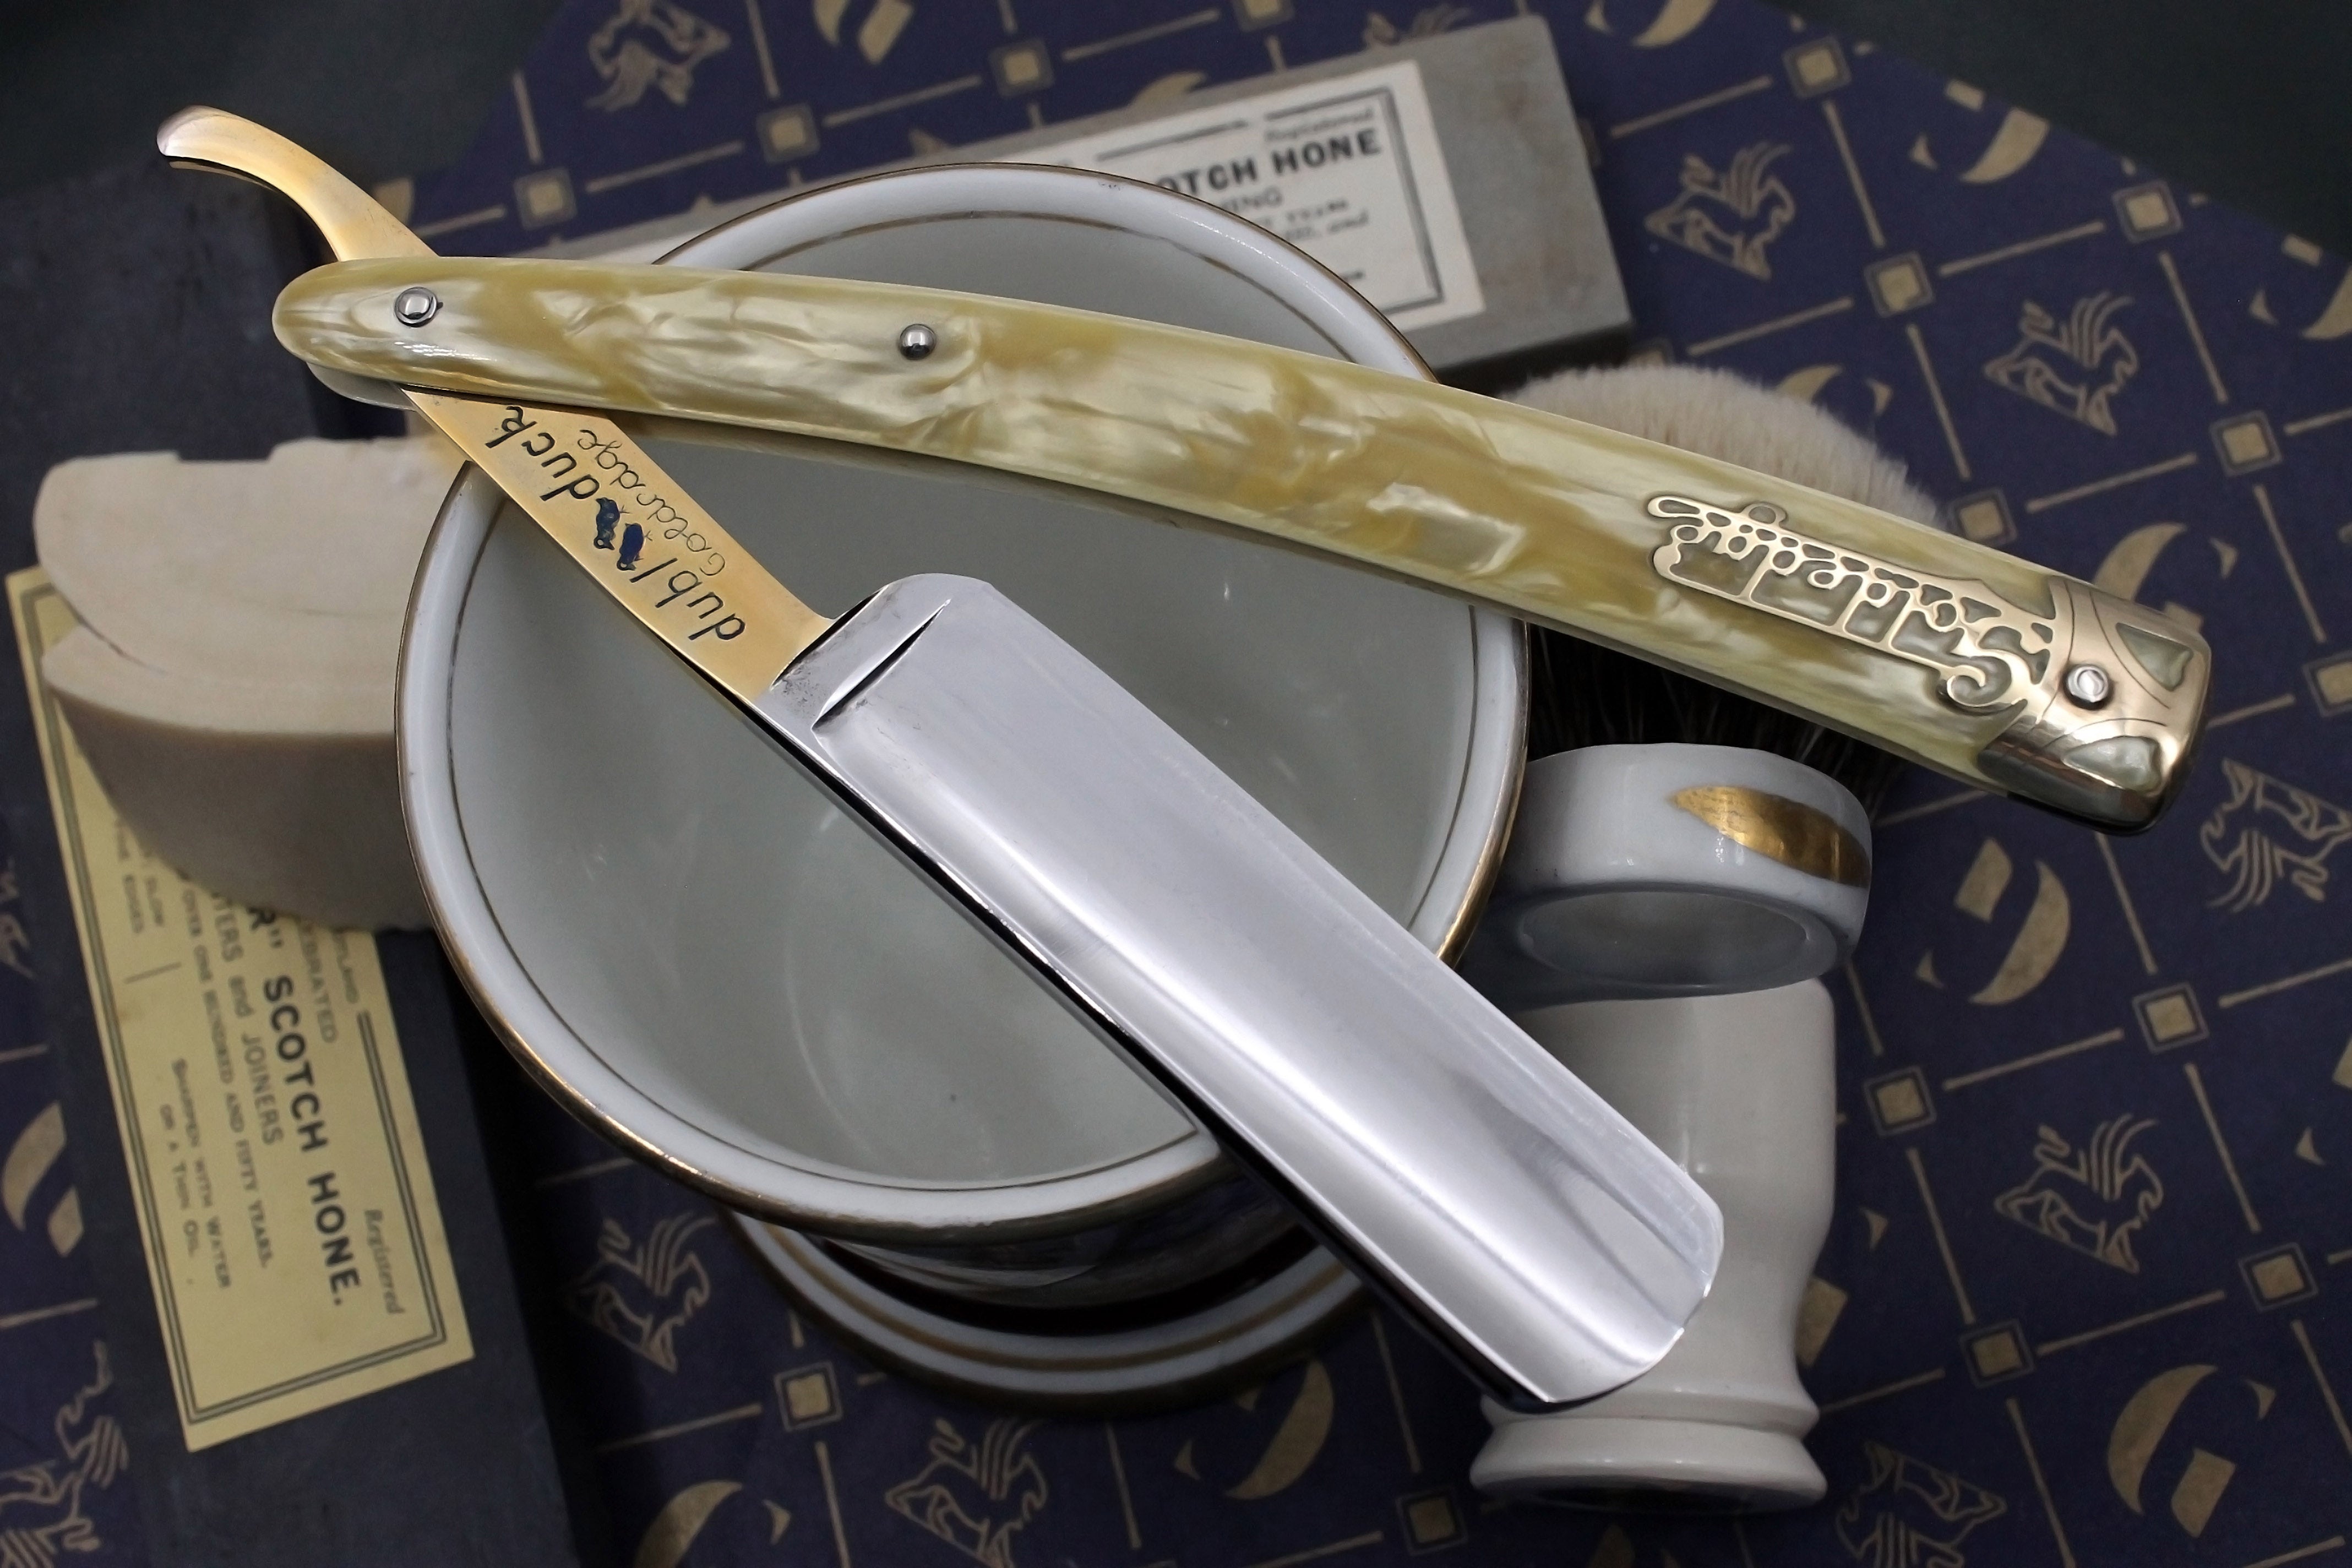 Dubl Duck Goldedge 6/8 Blade Cracked Ice Scales - Fully Restored Vintage Solingen Straight Razor - Shave Ready